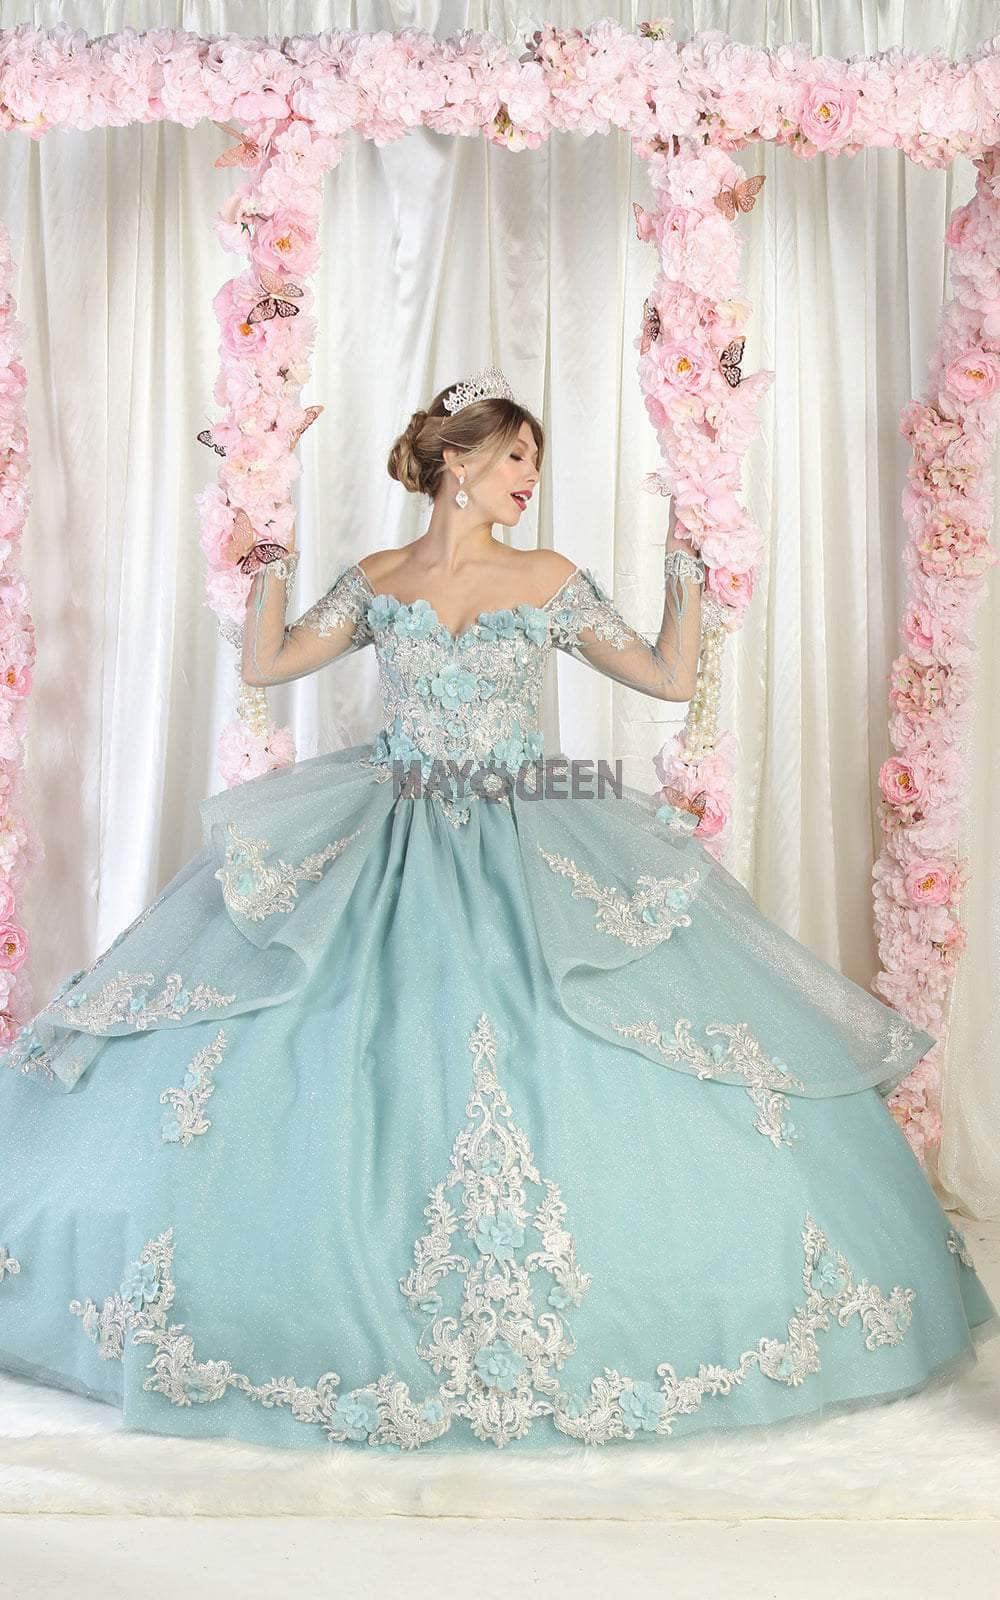 May Queen LK189 - Long Mesh Sleeve Ball Gown Special Occasion Dress